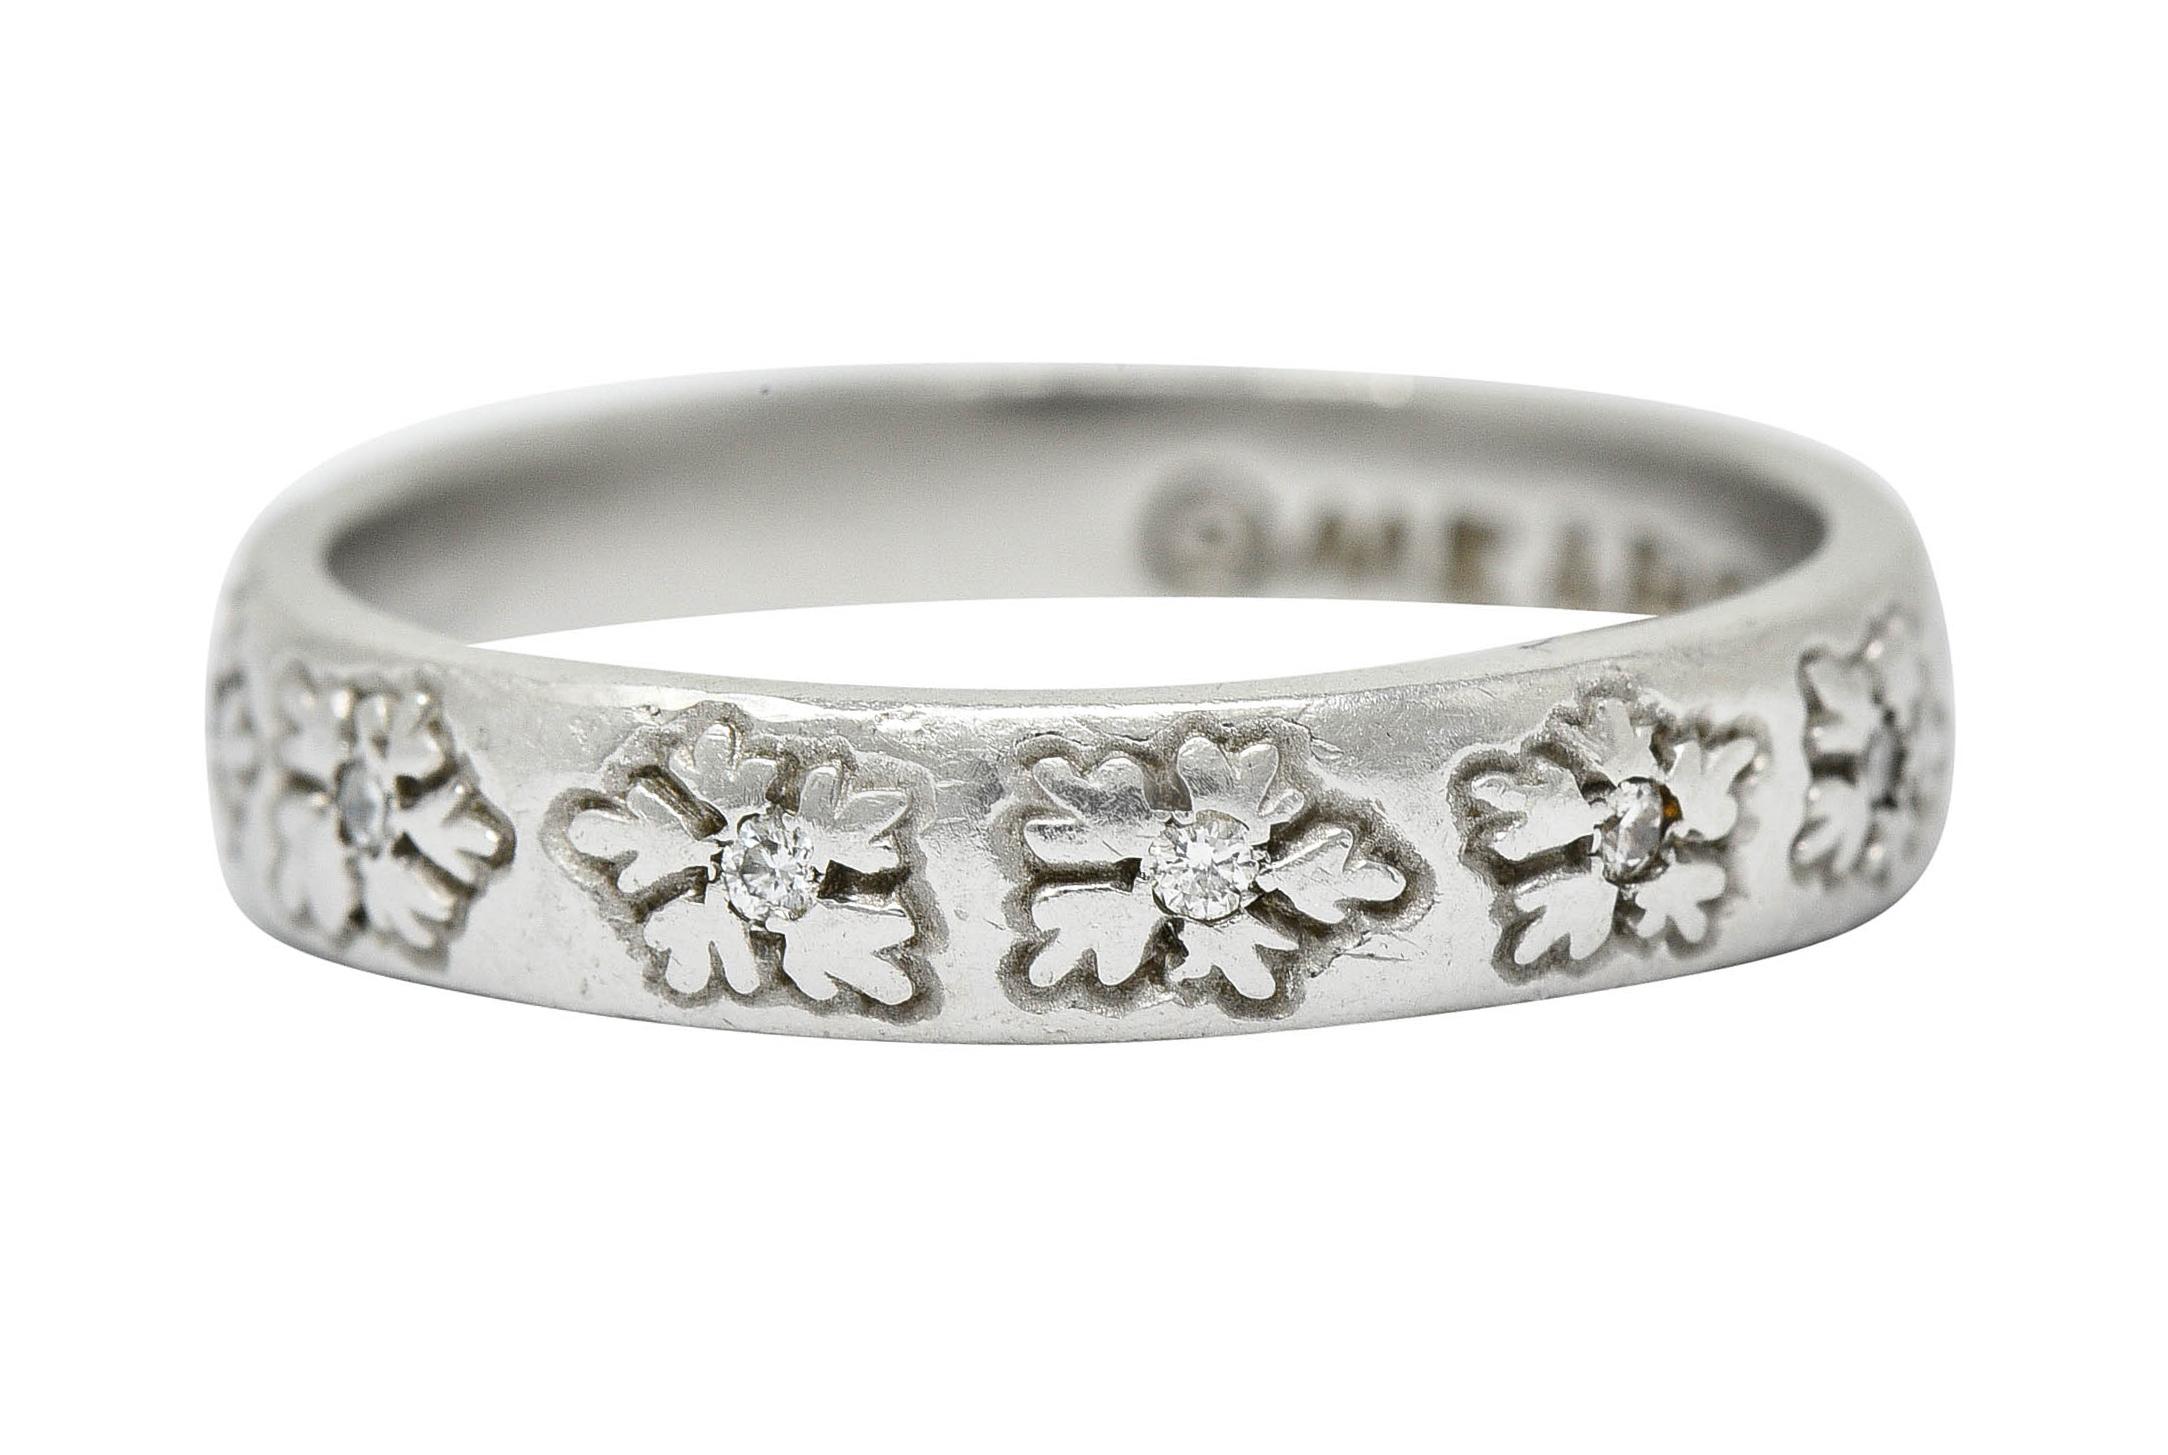 Band ring is deeply engraved fully around by a stylized floral motif

With round brilliant cut diamonds weighing in total approximately 0.18 carat - eye clean and white

Stamped PLAT for platinum

Fully signed Me & Ro

Circa: 2000s

Ring Size: 6 1/2